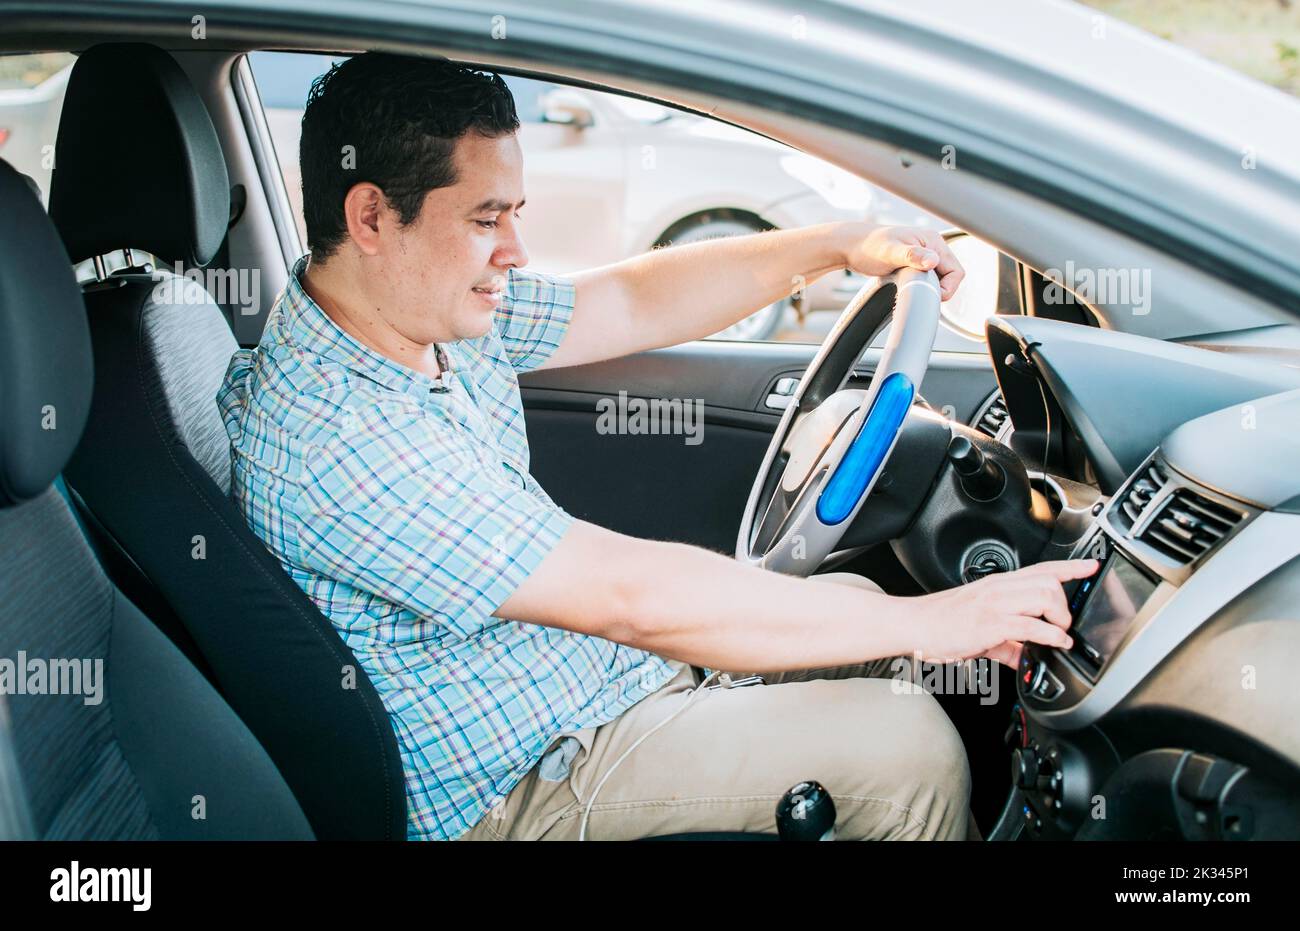 Driver man changing the radio station. Smiling driver tuning into the radio station. Distracted driver concept tuning the radio. Driving people Stock Photo